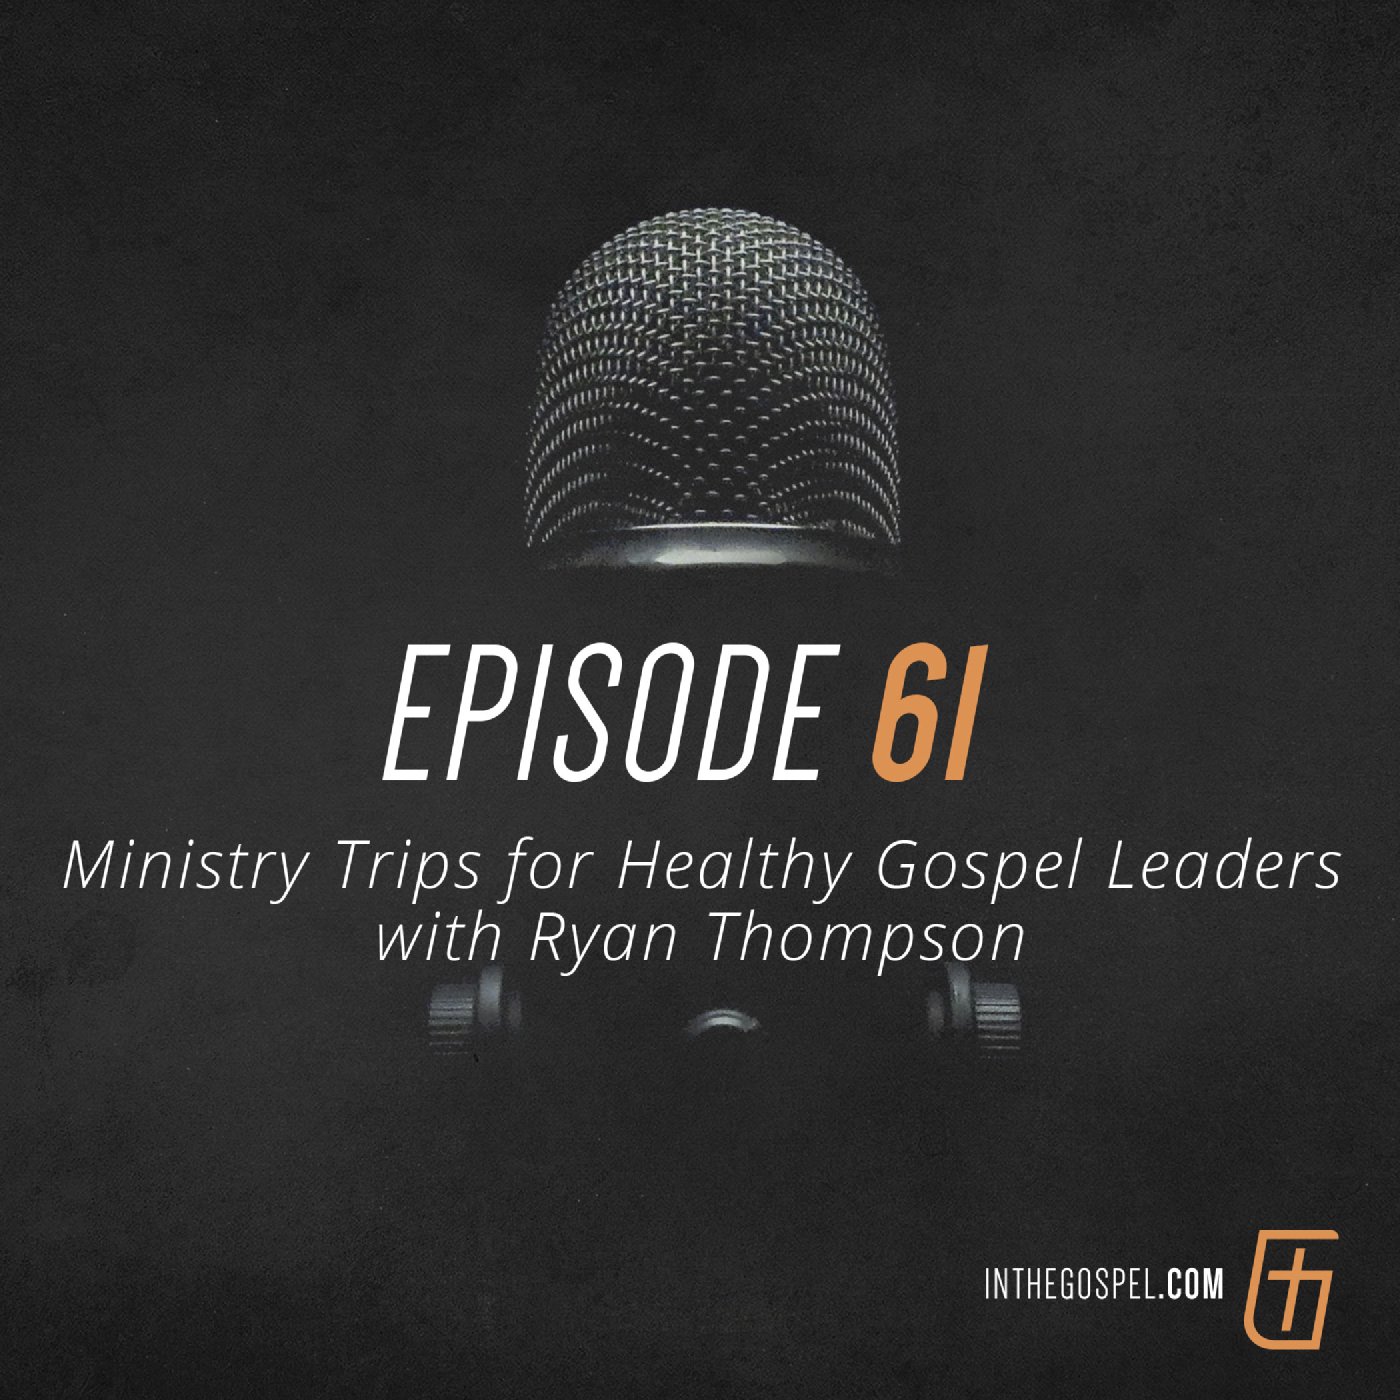 Episode 61: Ministry Trips for Healthy Gospel Leaders with Ryan Thompson